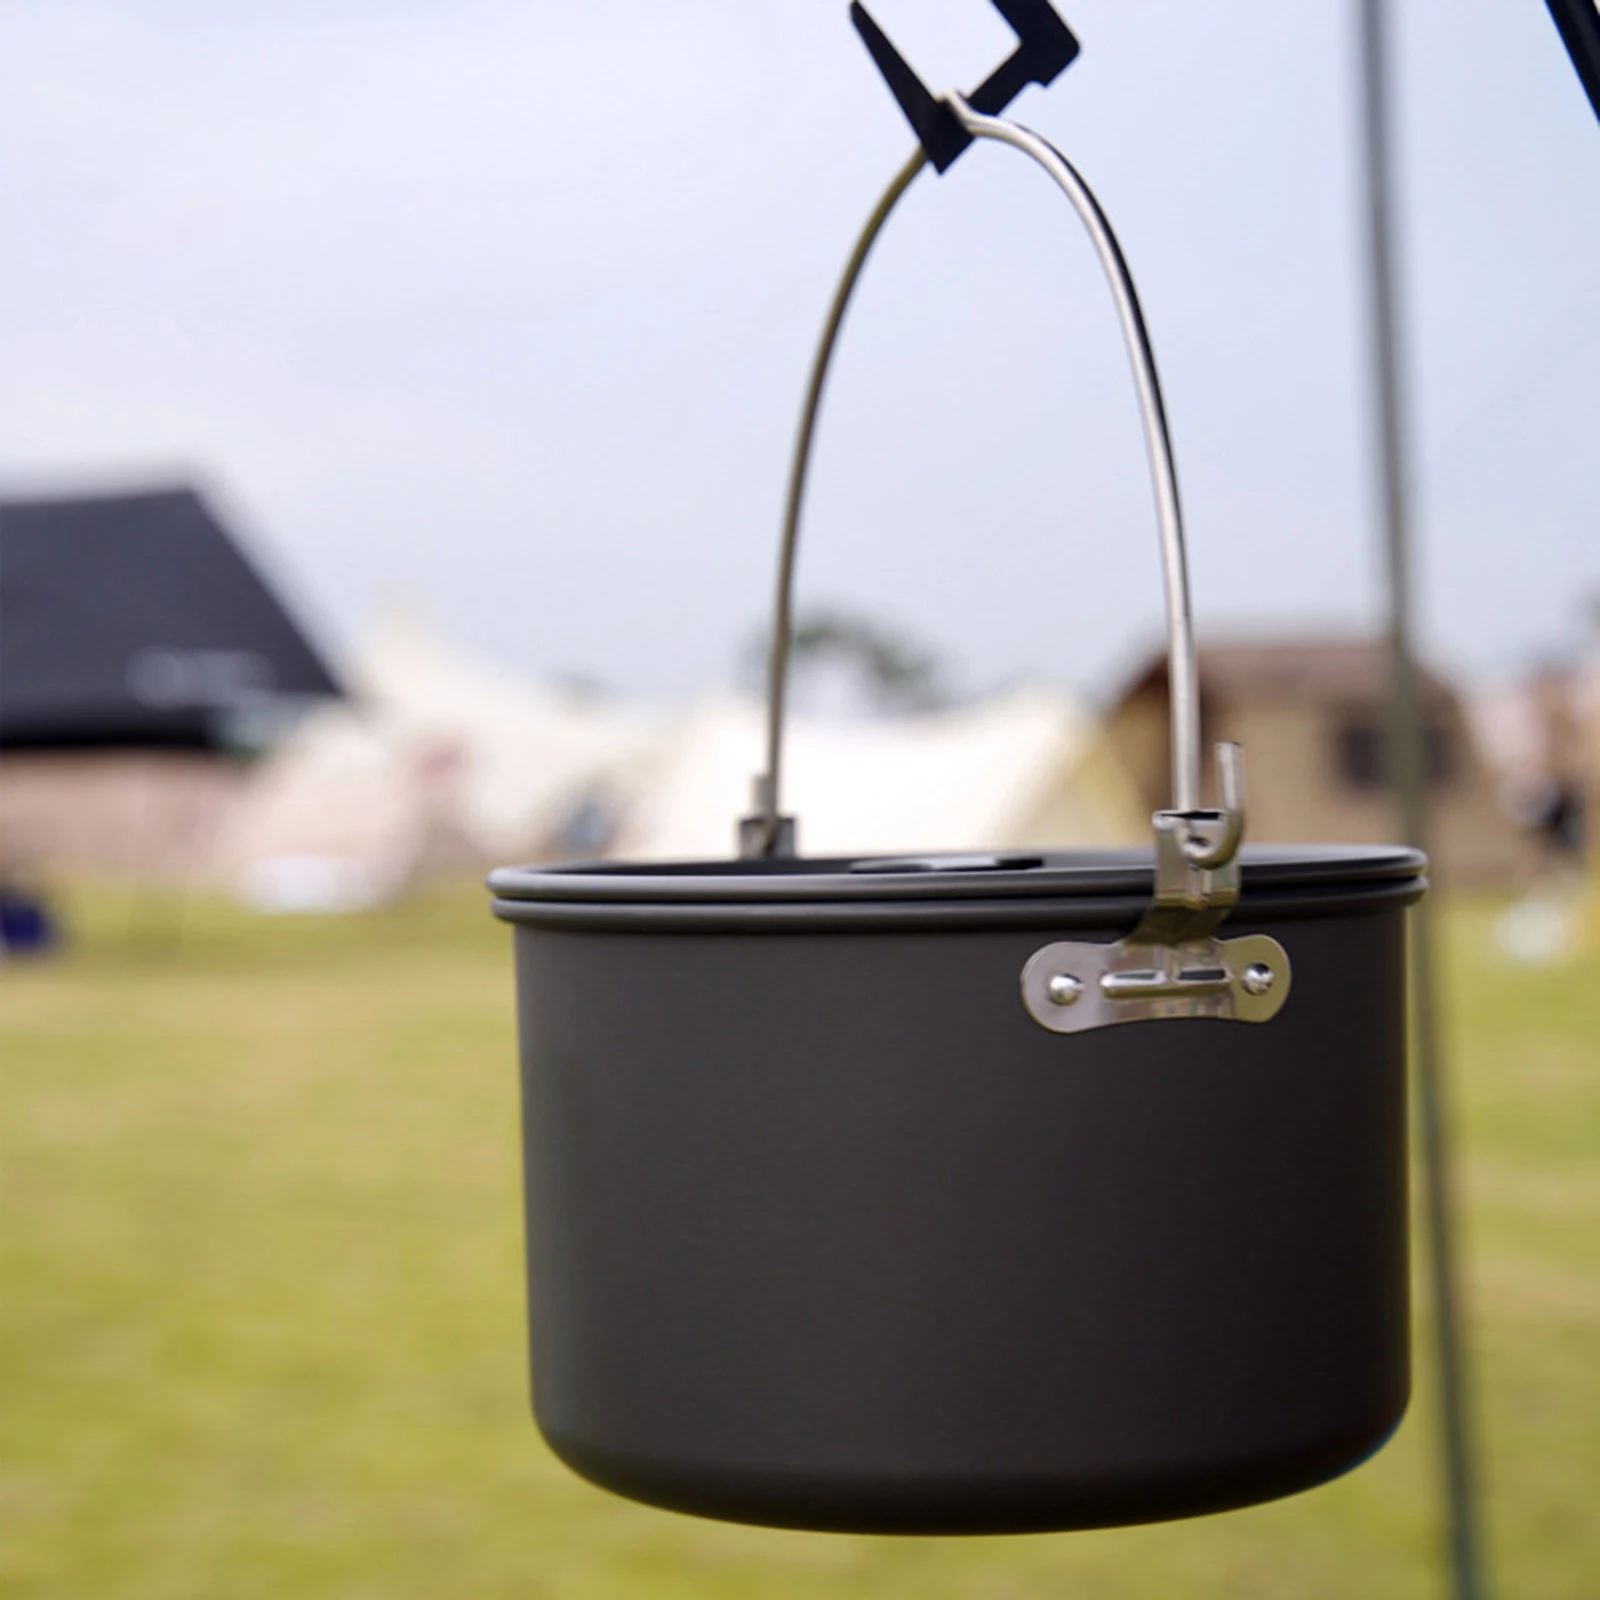 

Camping Pot 4.5L/4-Quart Hanging Cooking Pot With Lid Cookware For Outdoor Camping Hiking Fishing Hanging Pot-Non-Stick Pan